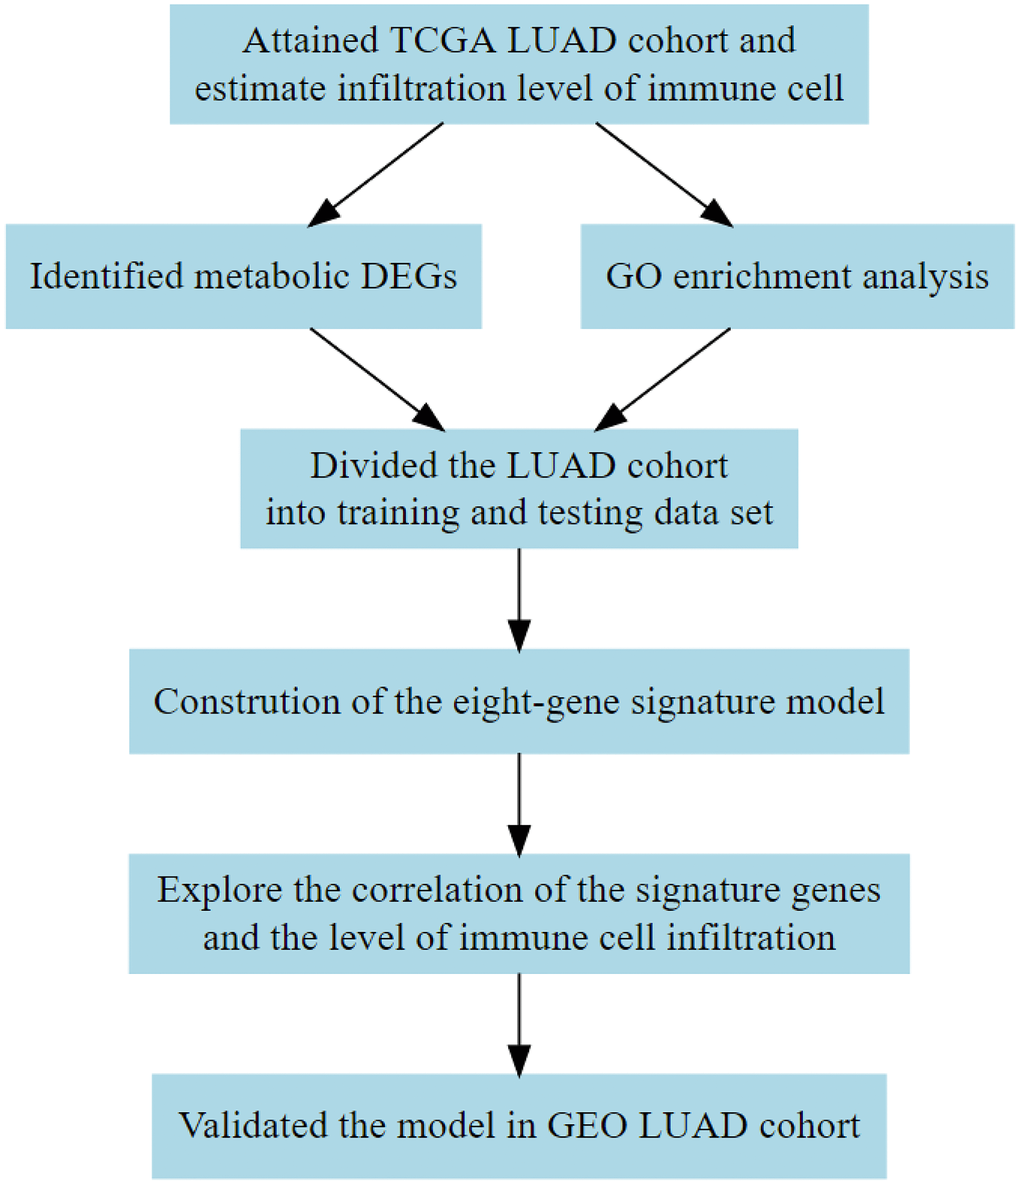 Flow diagram showing the design of the study. TCGA, The Cancer Genome Atlas; DEG, differentially expressed gene; GEO, Gene Expression Omnibus; GO, Gene Ontology.